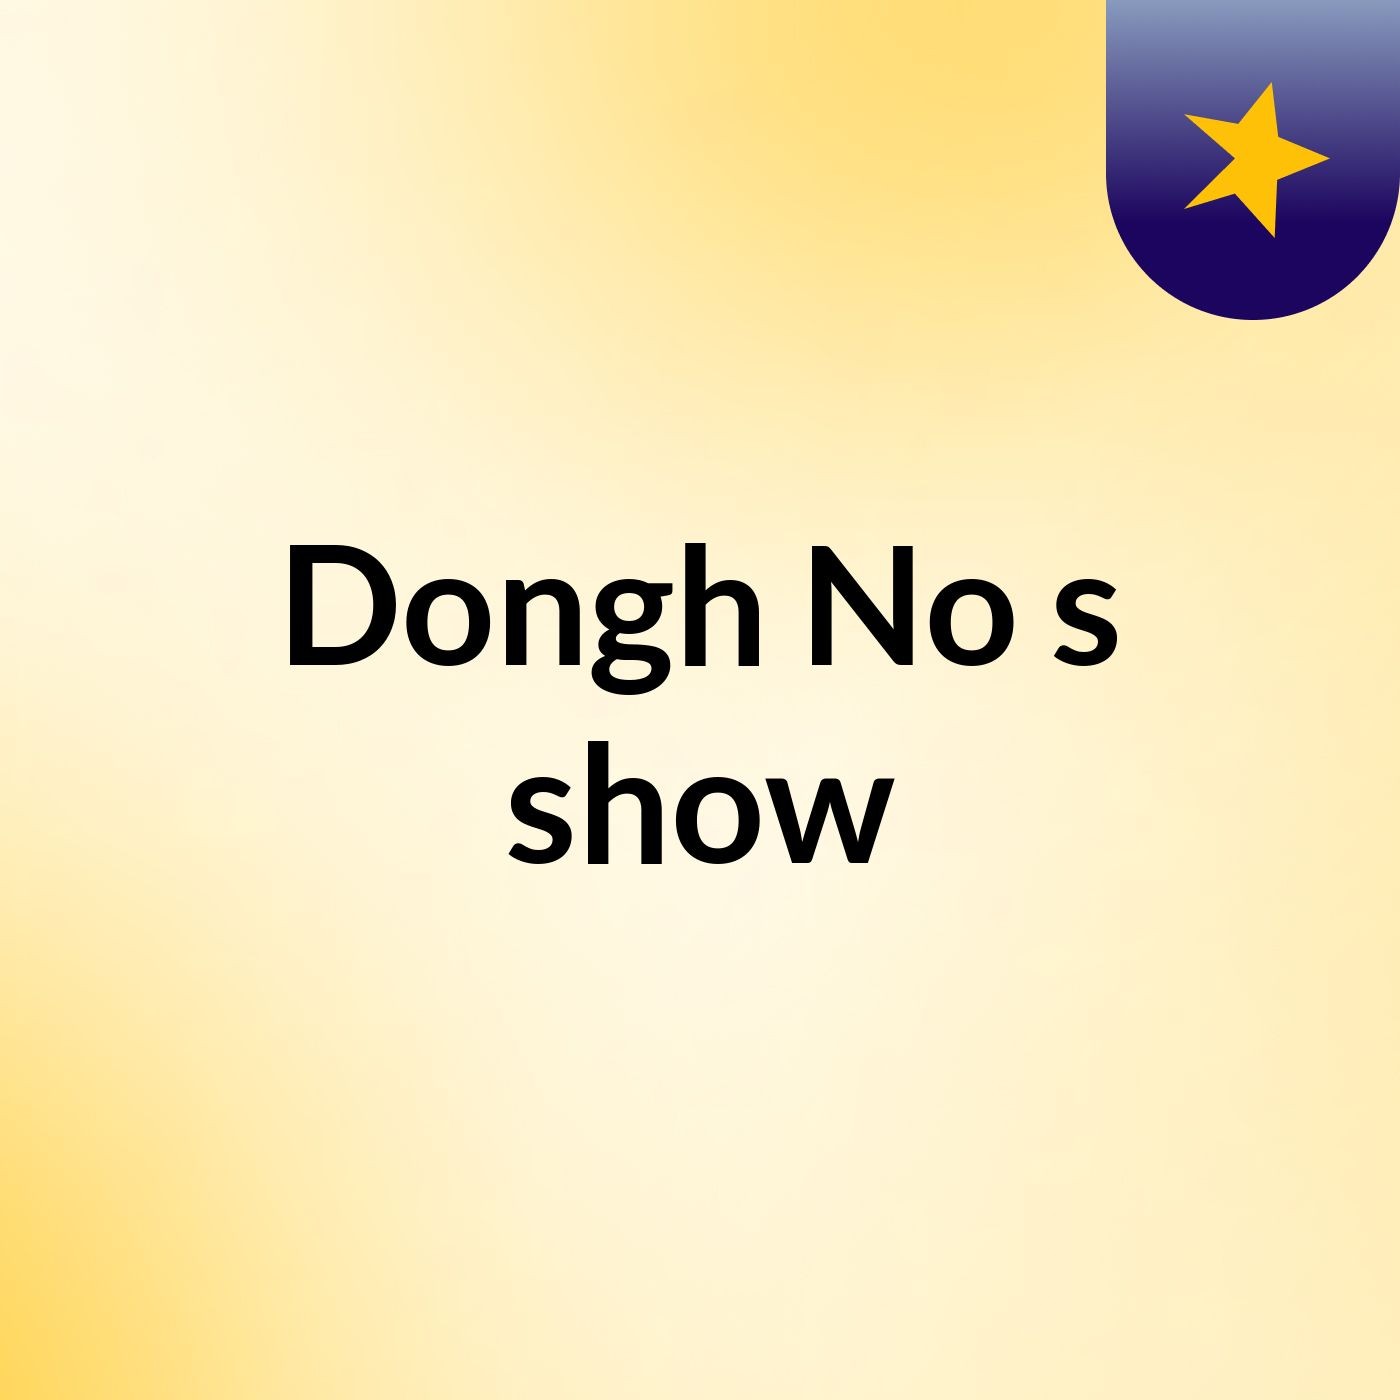 Dongh No's show